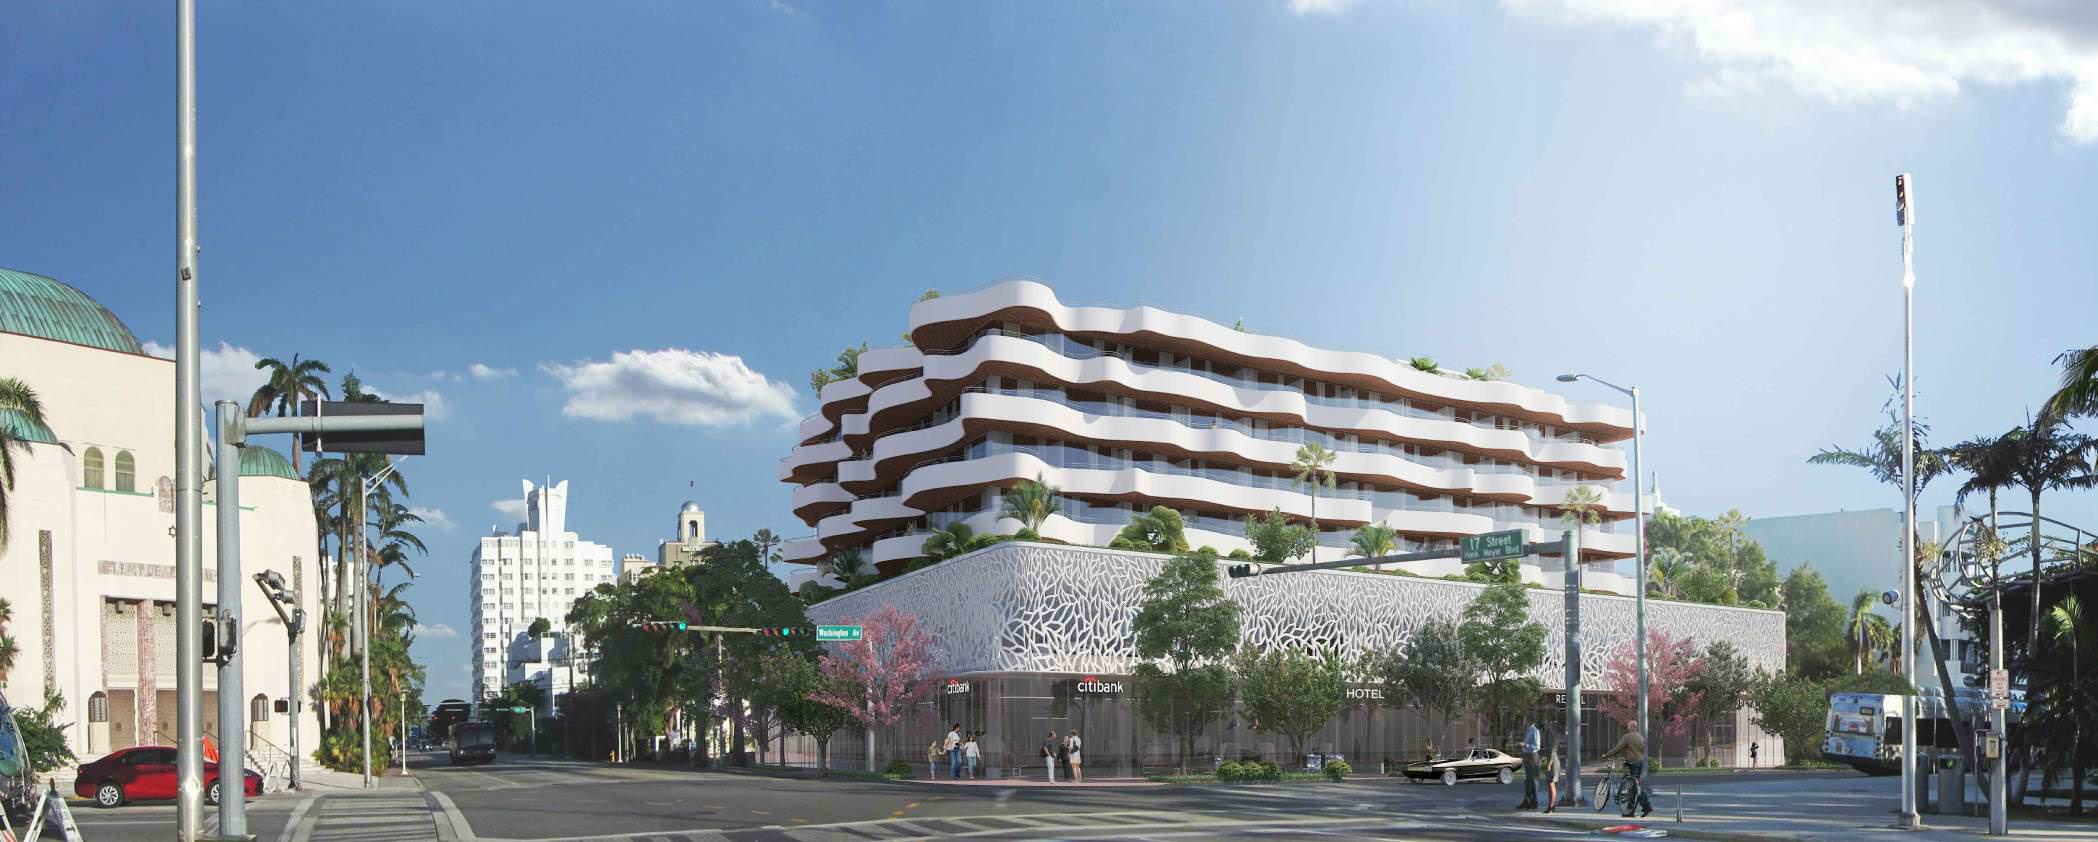 Rudy Ricciotti-Designed Symphony Park Hotel Proposed To Be Built In South Beach